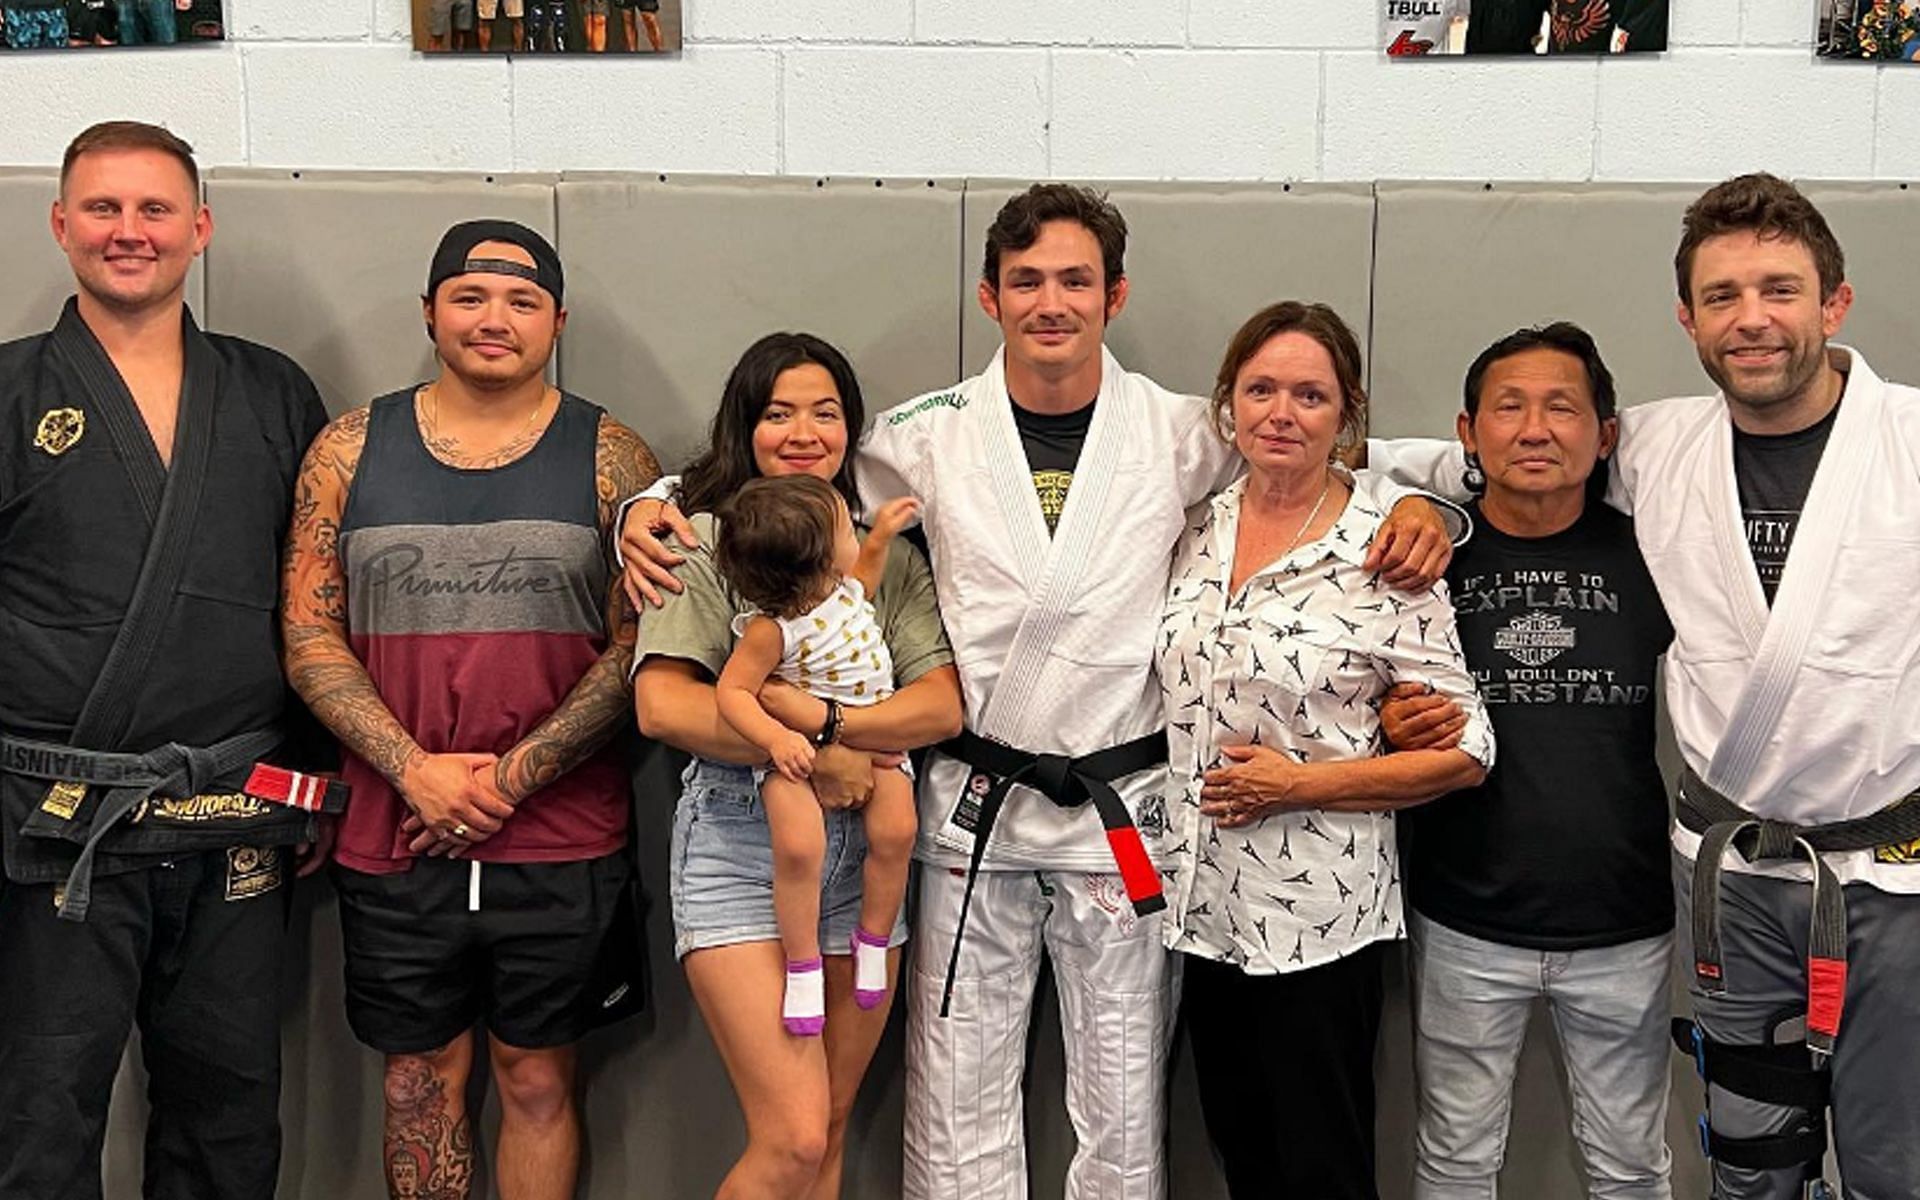 Thanh Le (C) is flanked by family and friends, including Ryan Hall (R), who awarded him his BJJ black belt. | [Photo: @thanhlemma on Instagram]